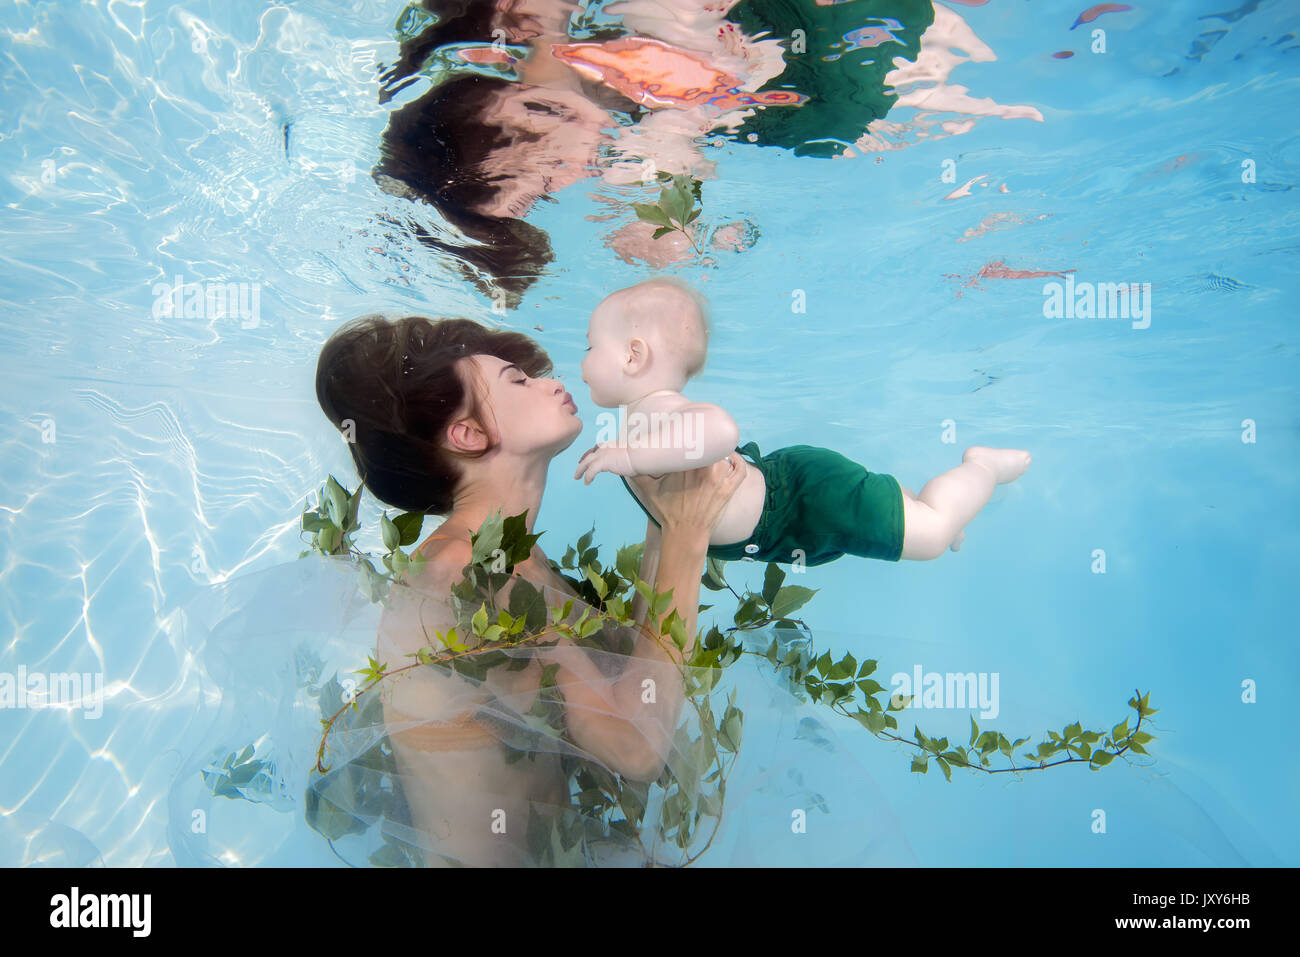 Woman in green dress with little boy posing under water in pool Stock Photo